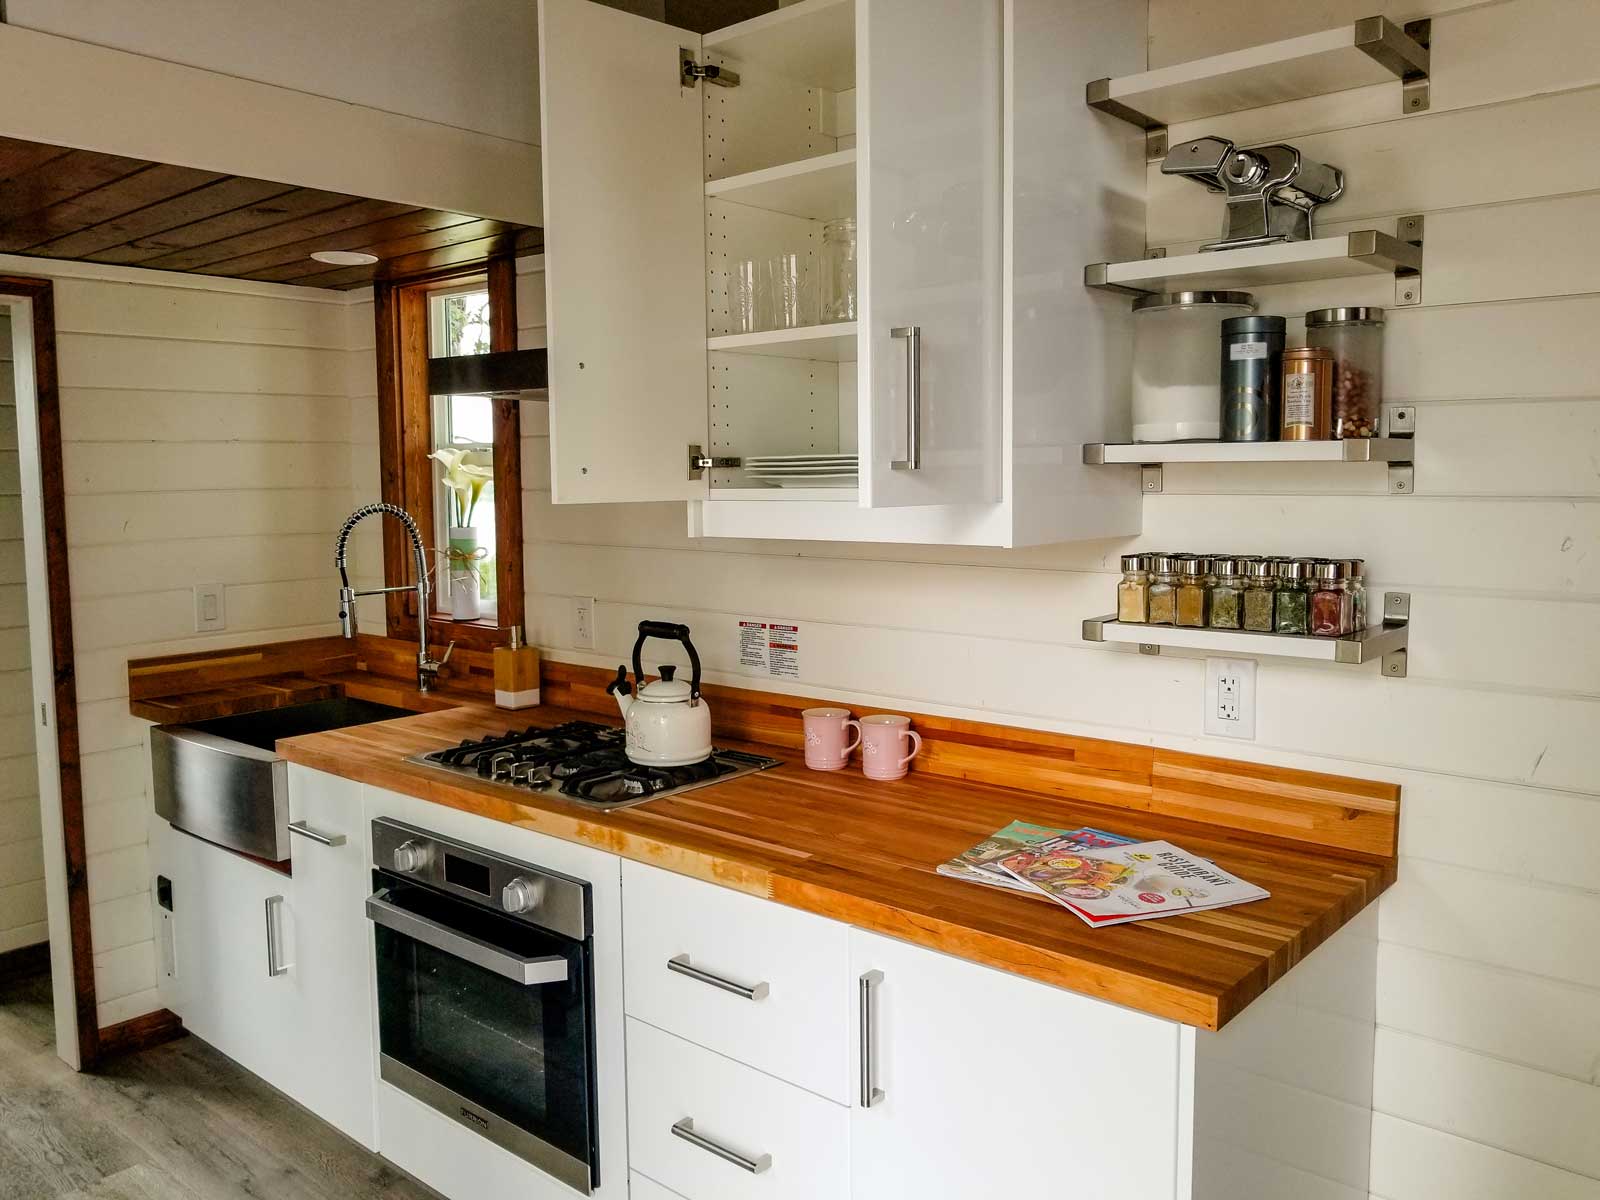 Interior of cozy cottage custom tiny house, showing the kitchen